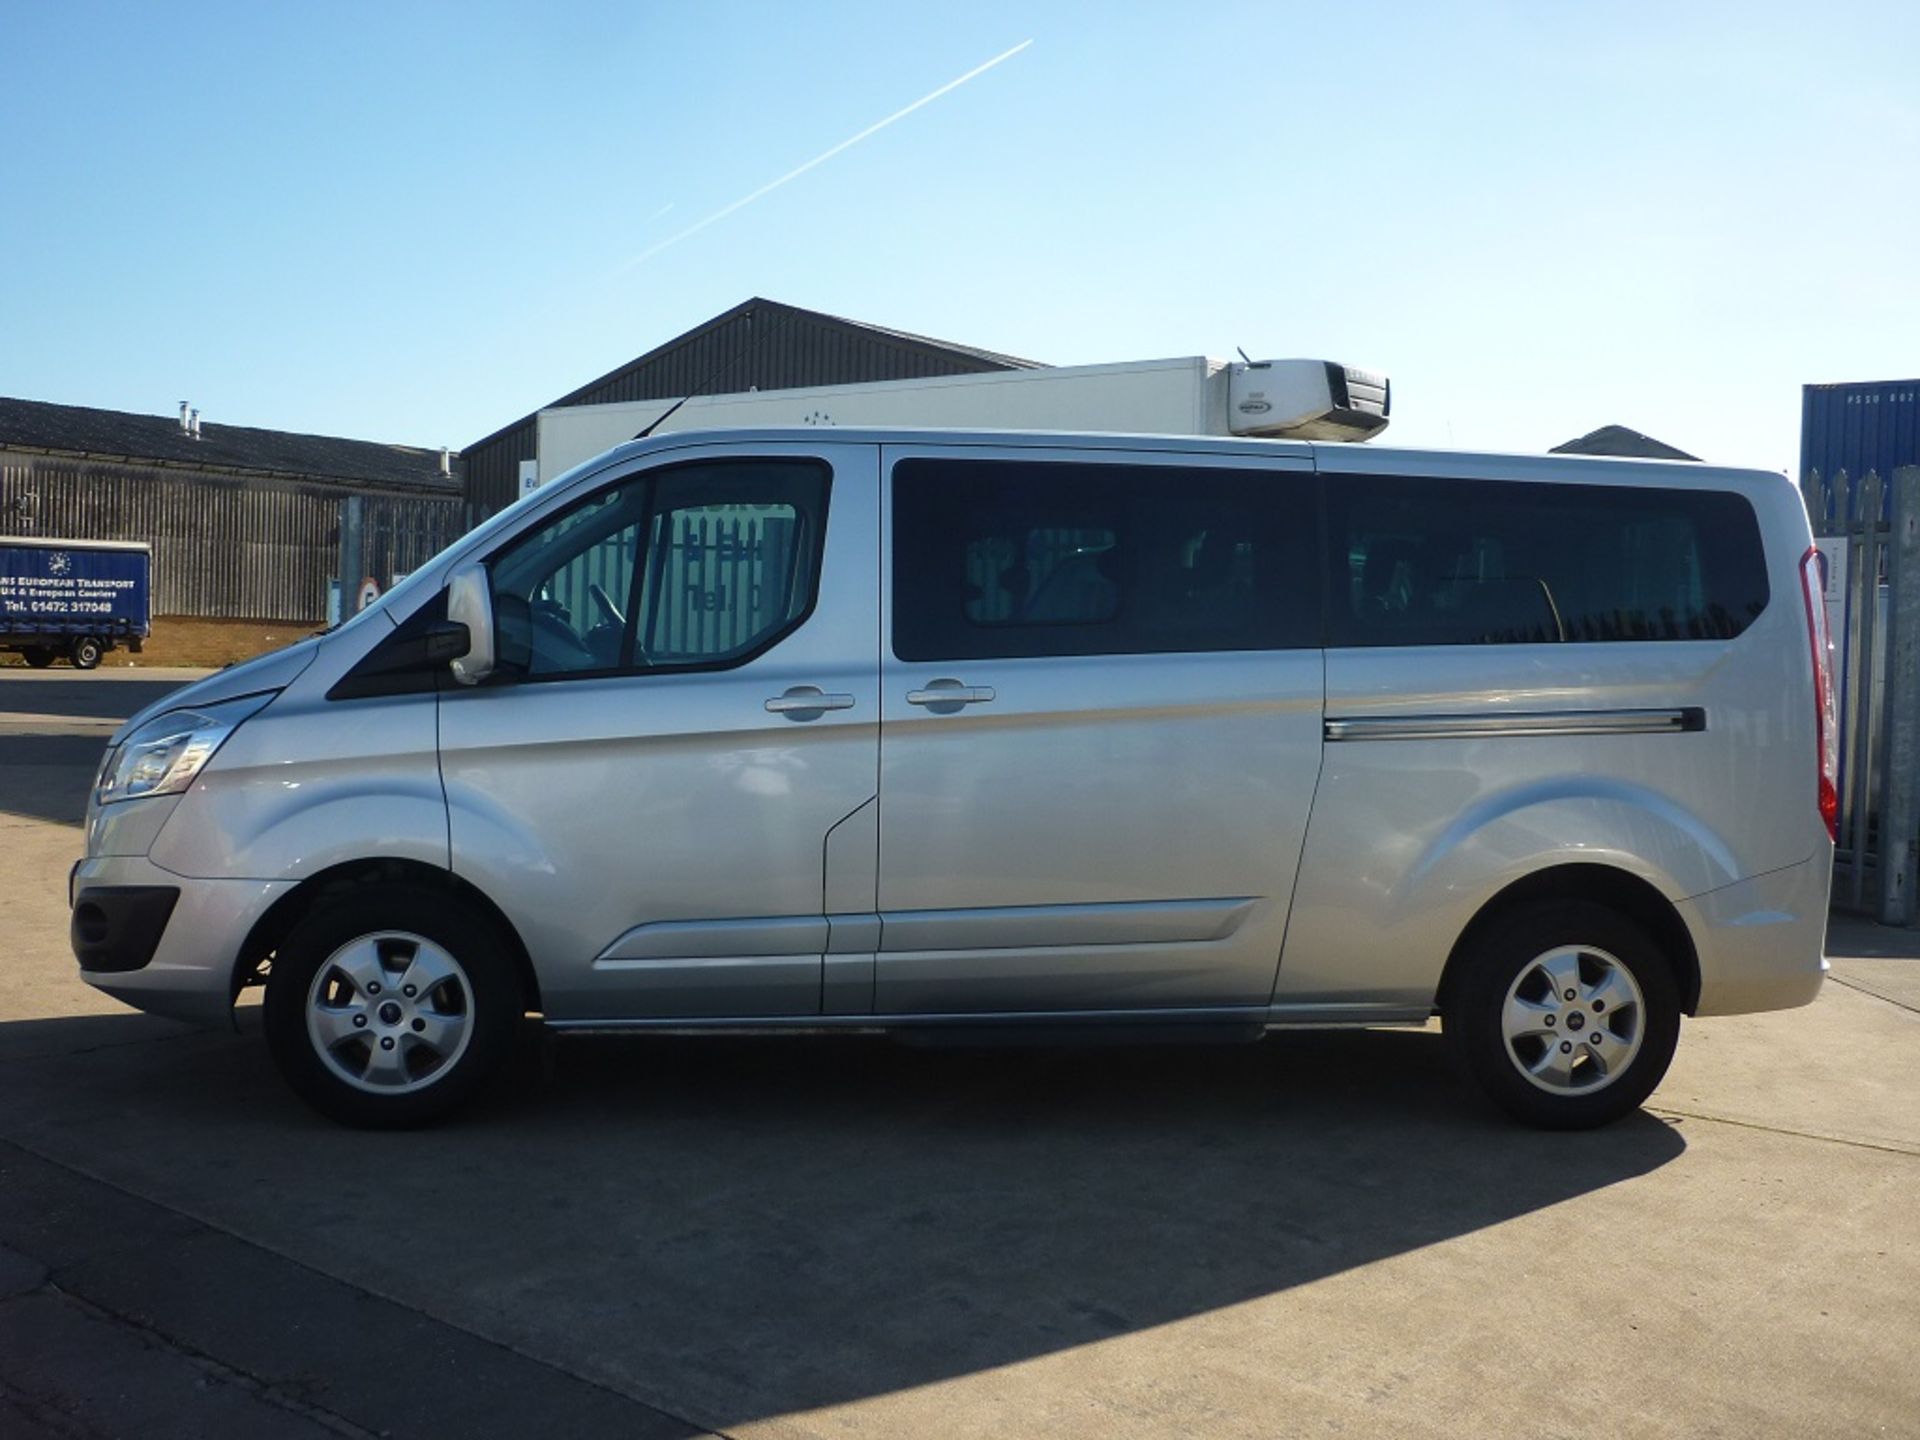 2015/15 REG FORD TOURNEO CUSTOM 300 LIMITED EDITION SILVER DIESEL MPV, SHOWING 0 FORMER KEEPERS - Image 2 of 8